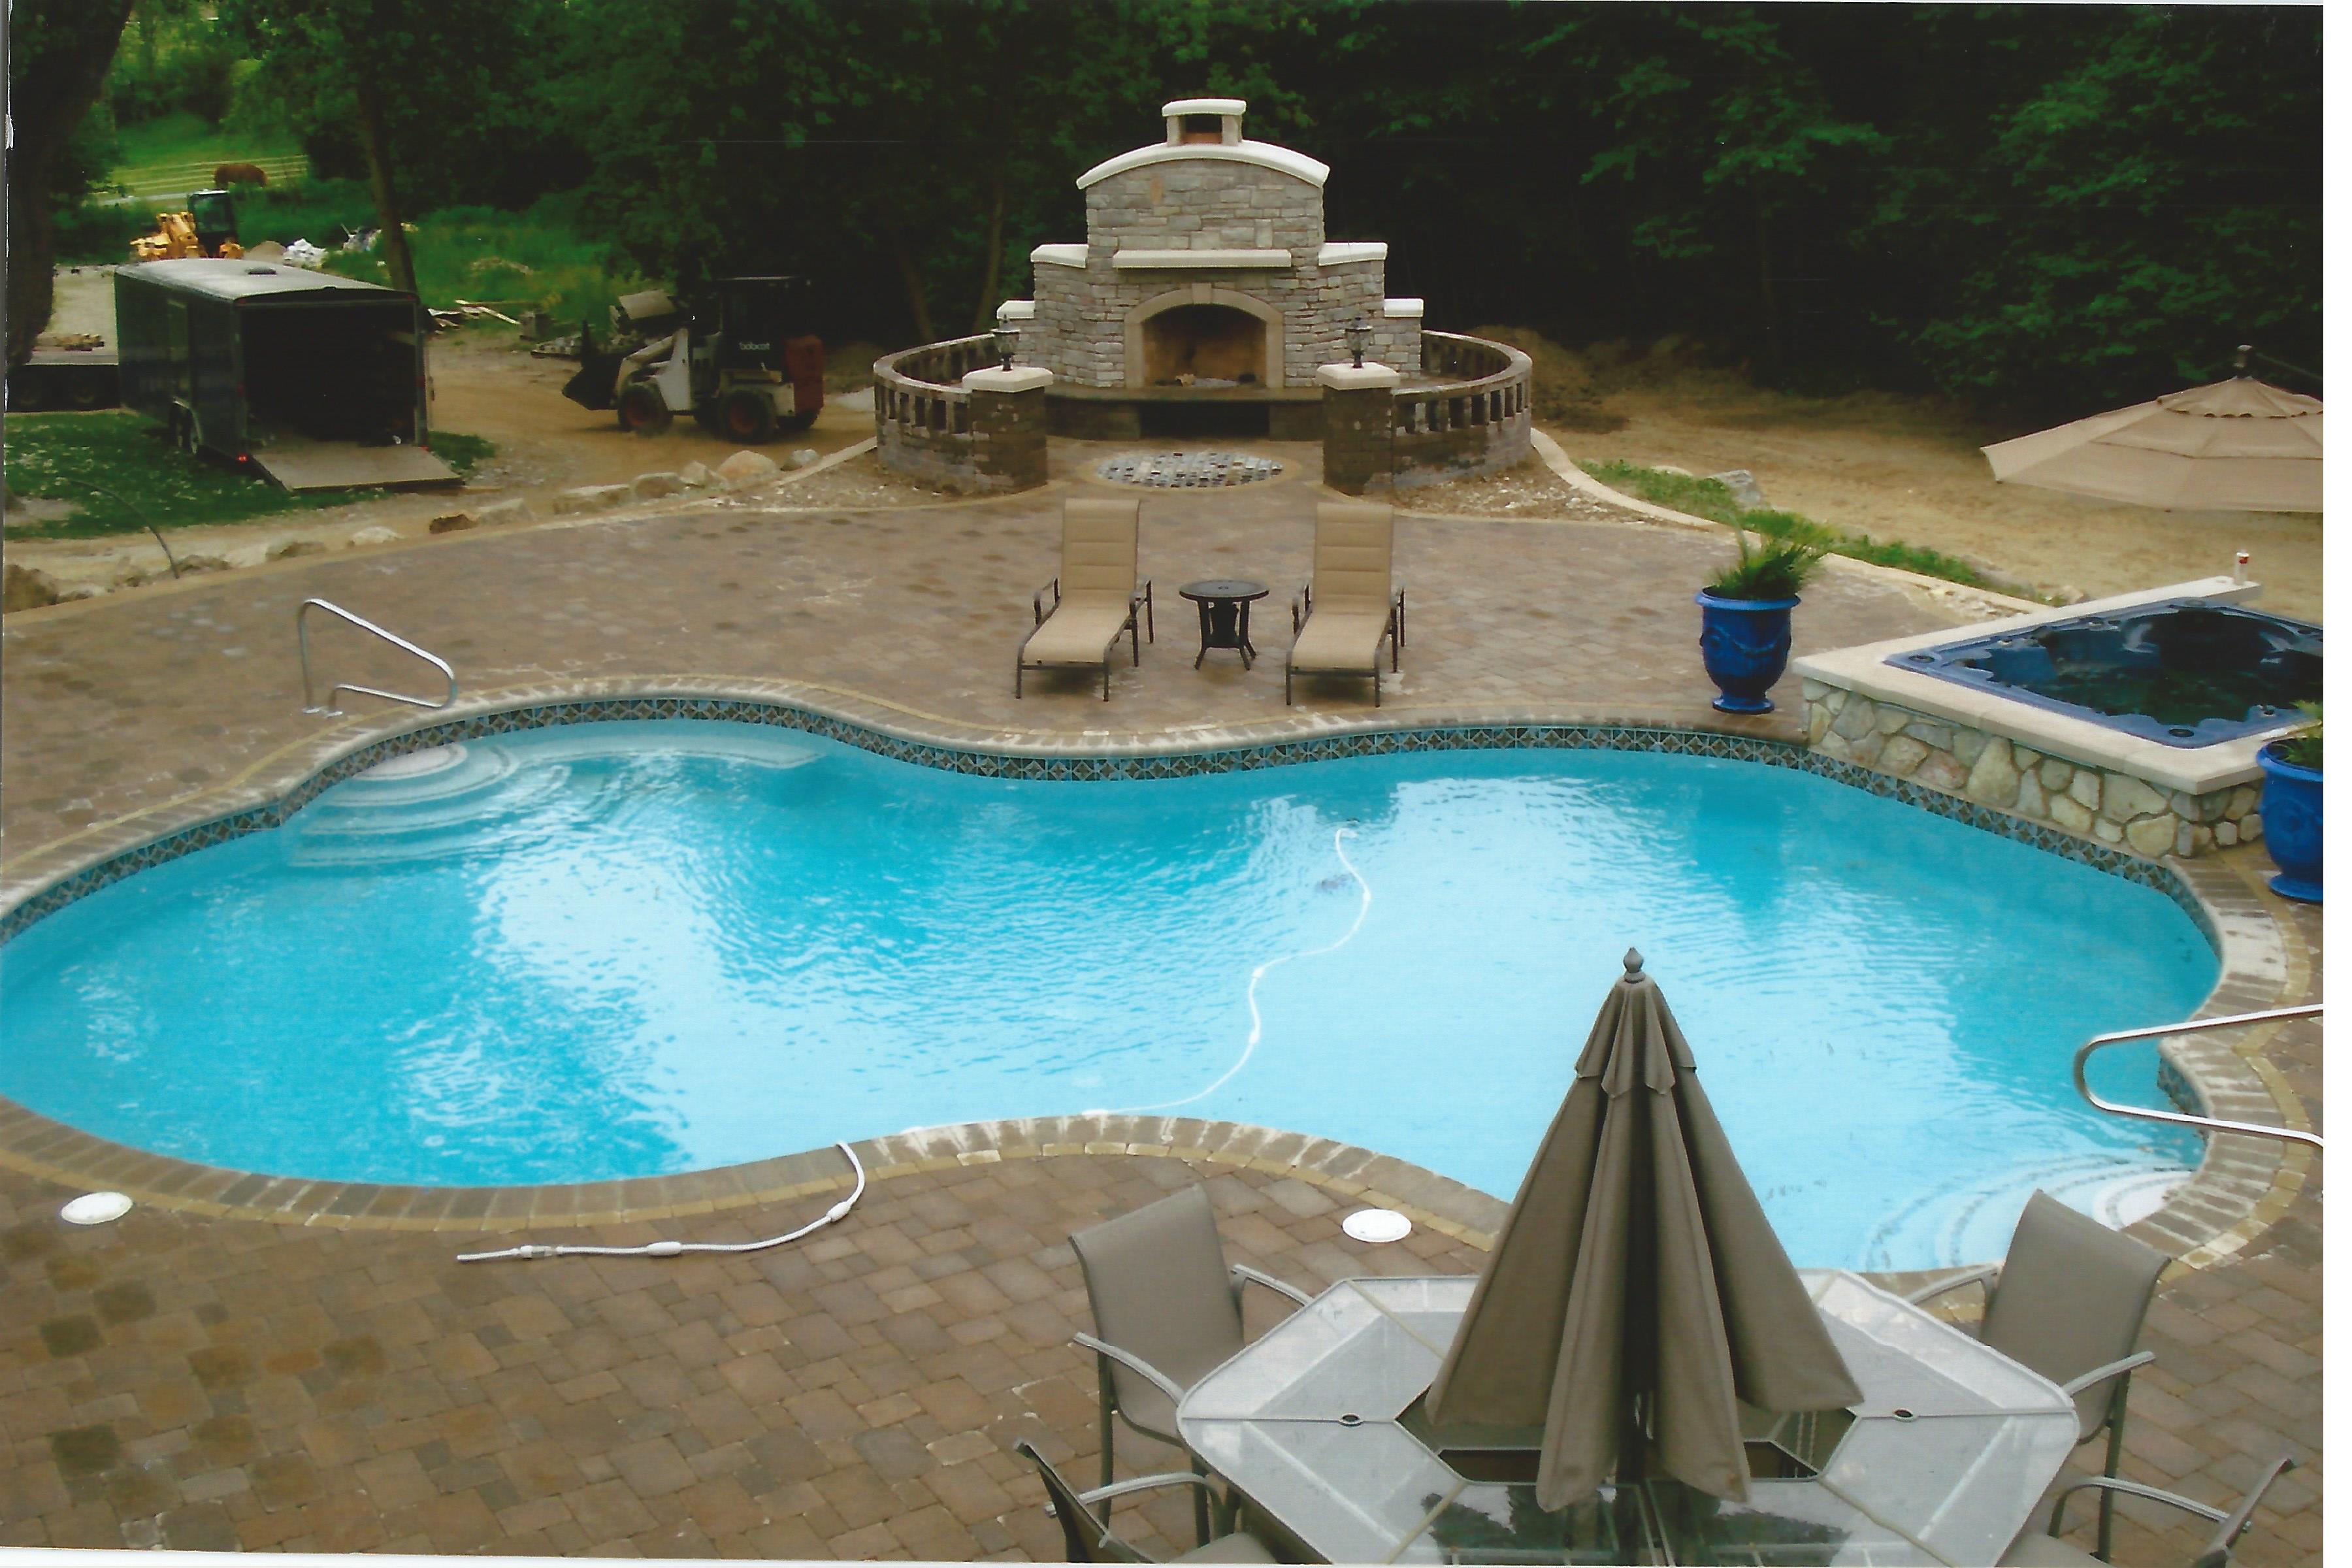 A pool surrounded by brick with a fireplace in the back